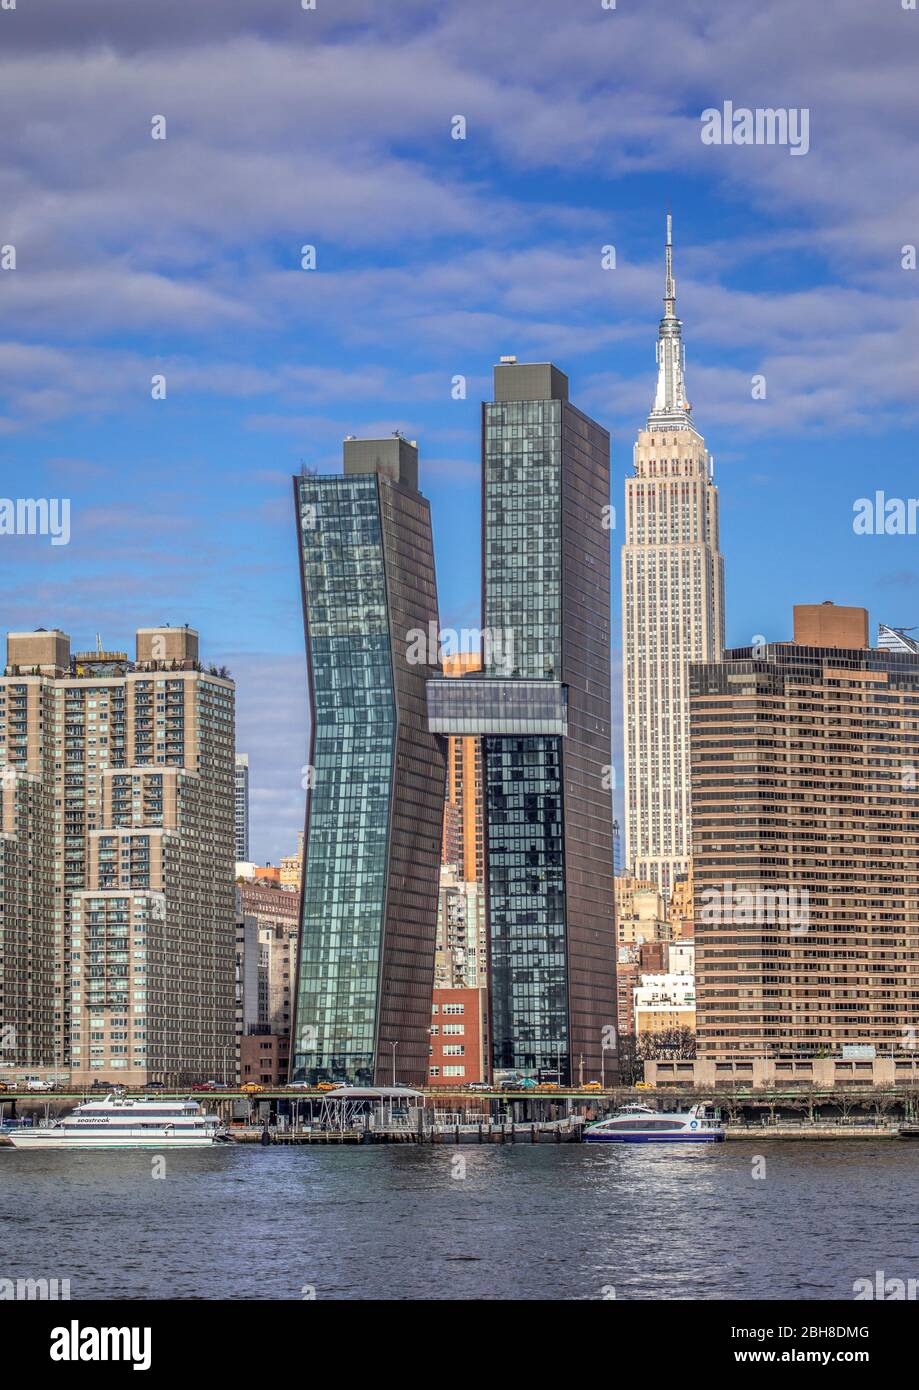 USA, New York City, Manhattan, Midtown, Empire State Bldg., East River Banque D'Images